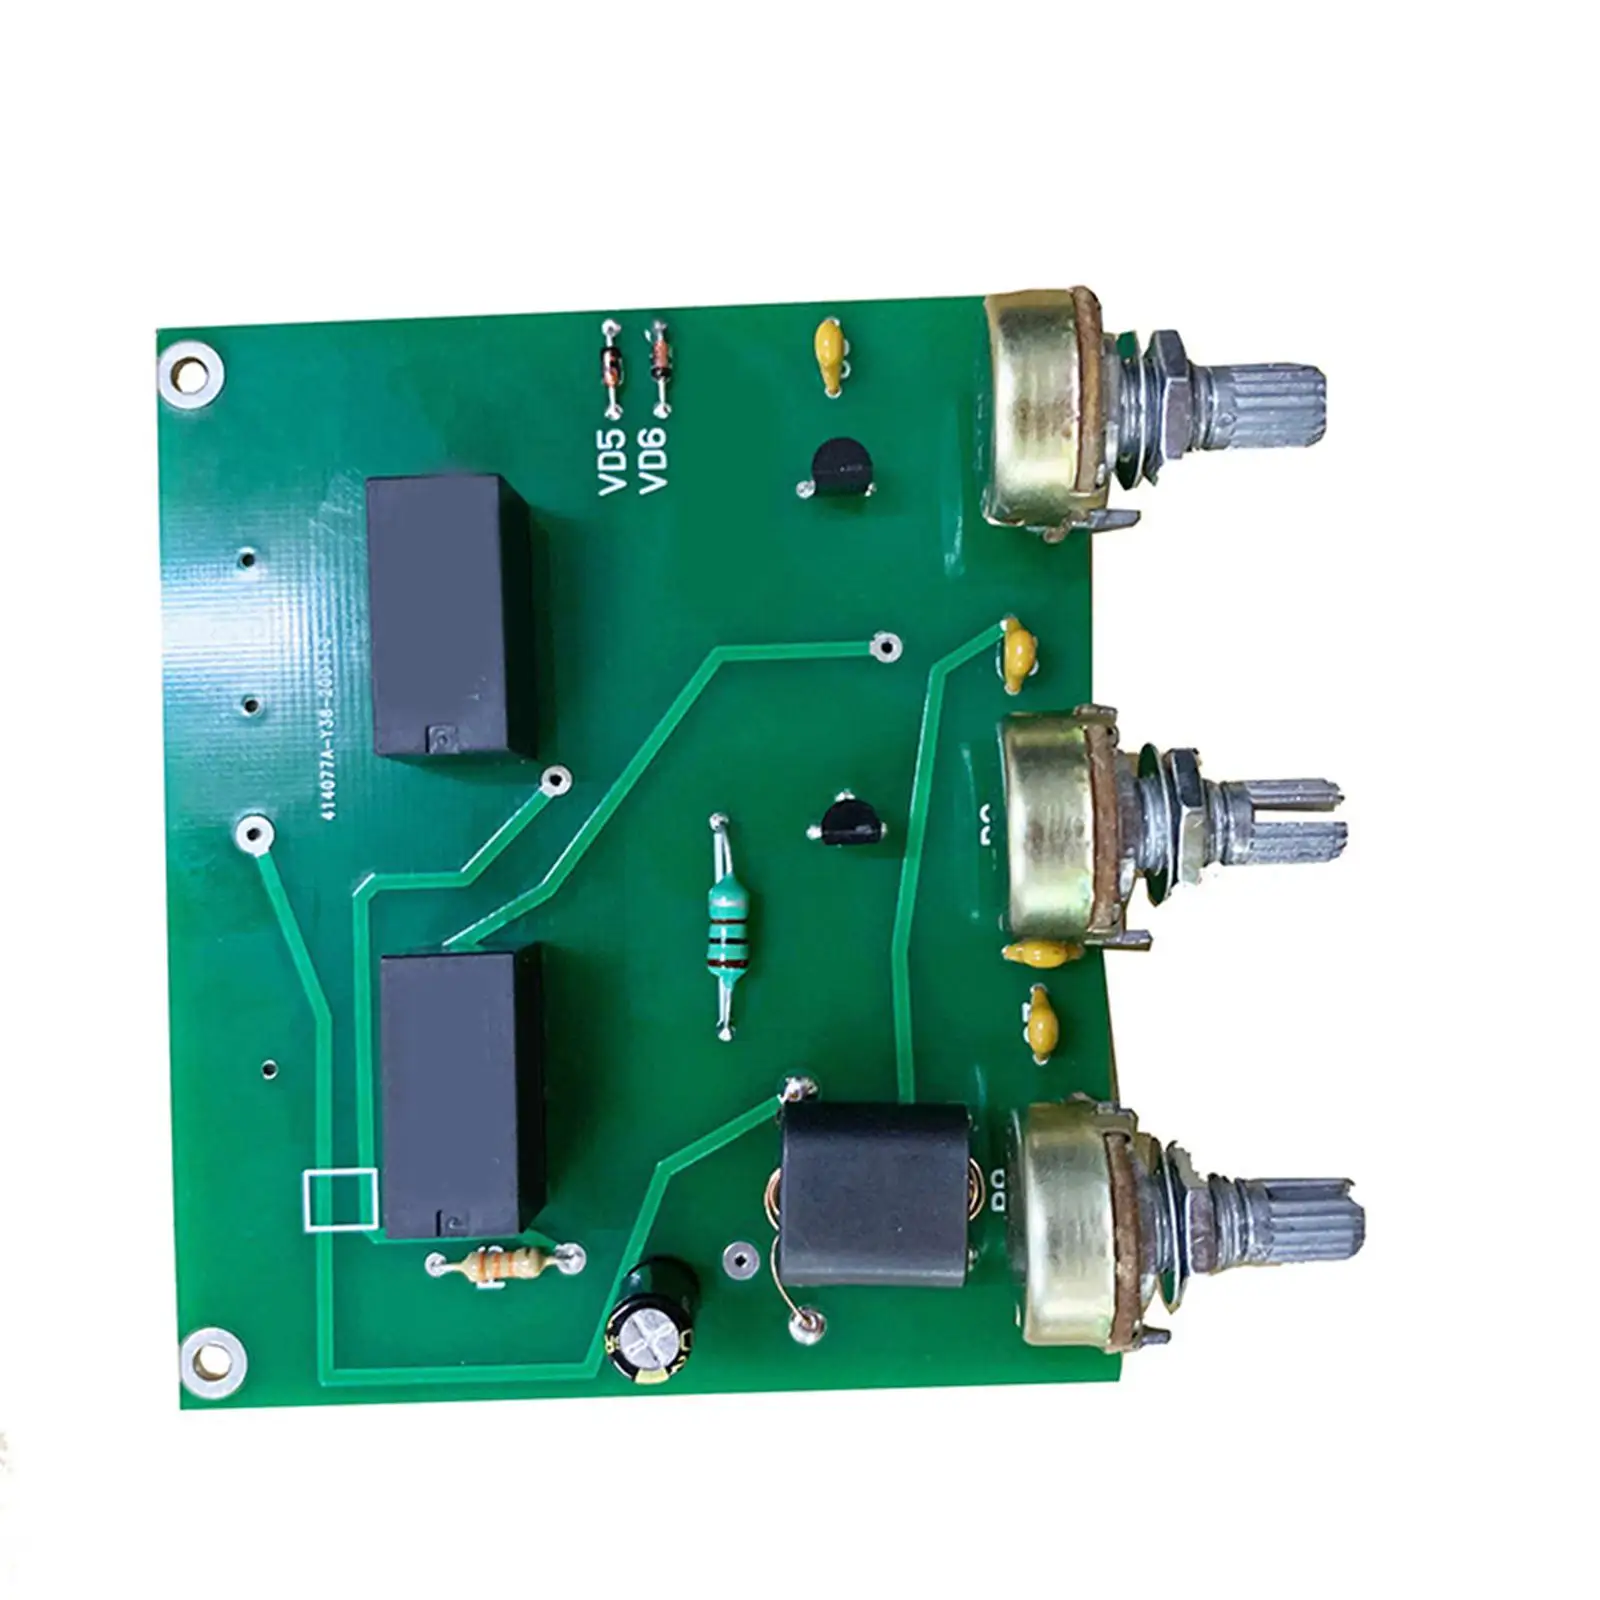 Qrm Eliminator X-Phase 1-30 MHz Qrm Eliminator X-Phase 1MHz to 30MHz Metal Shell Signal Canceller for Signal Ham Radio Amplifier